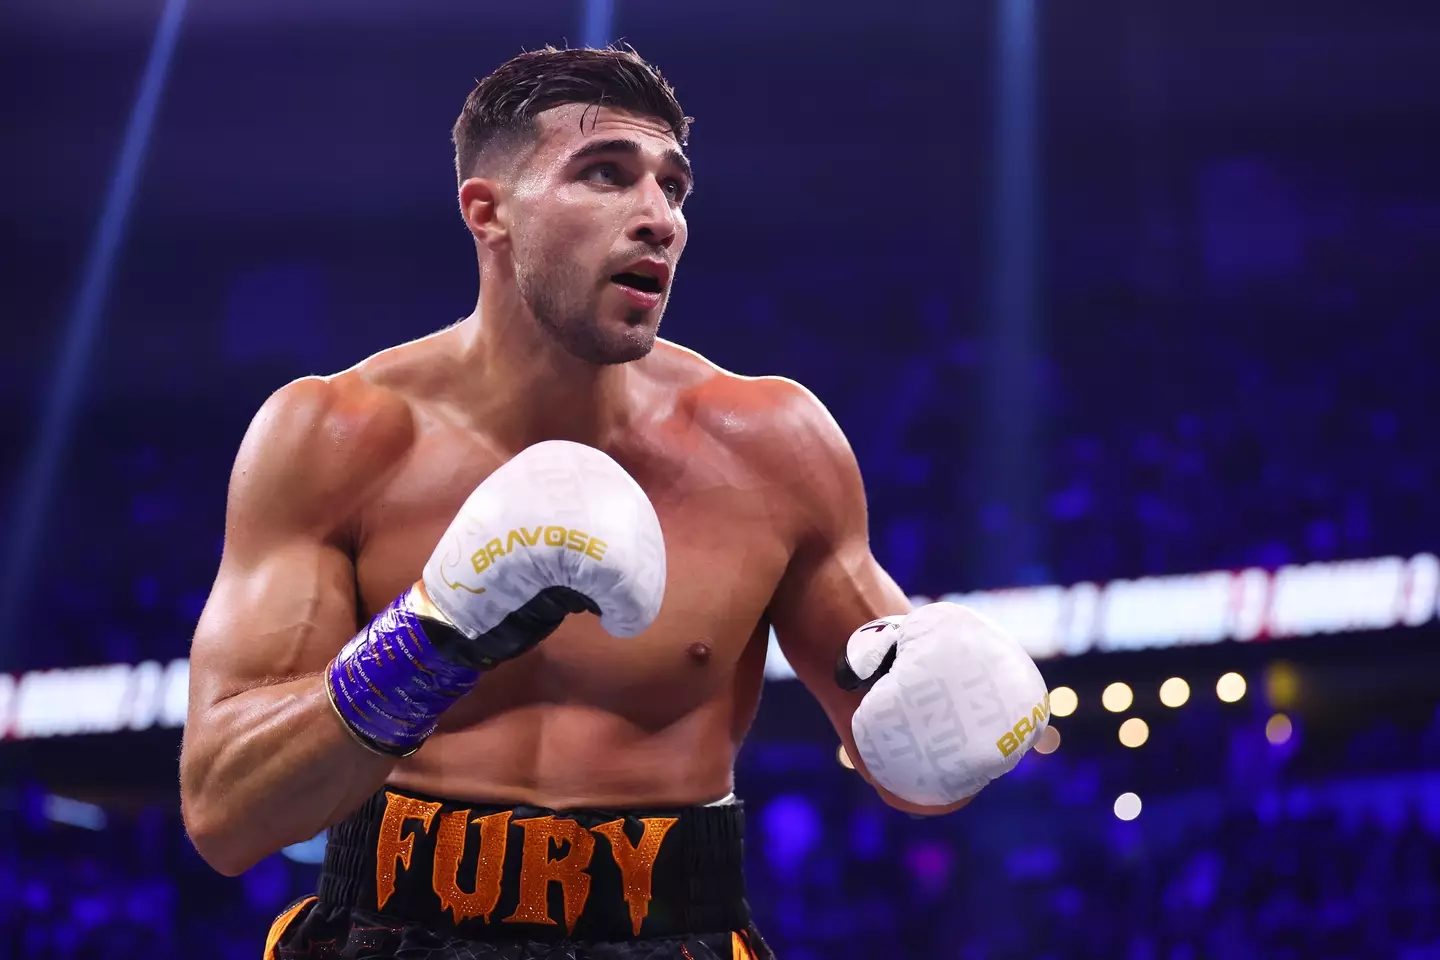 Tommy Fury said he would 'love' to fight Conor McGregor.